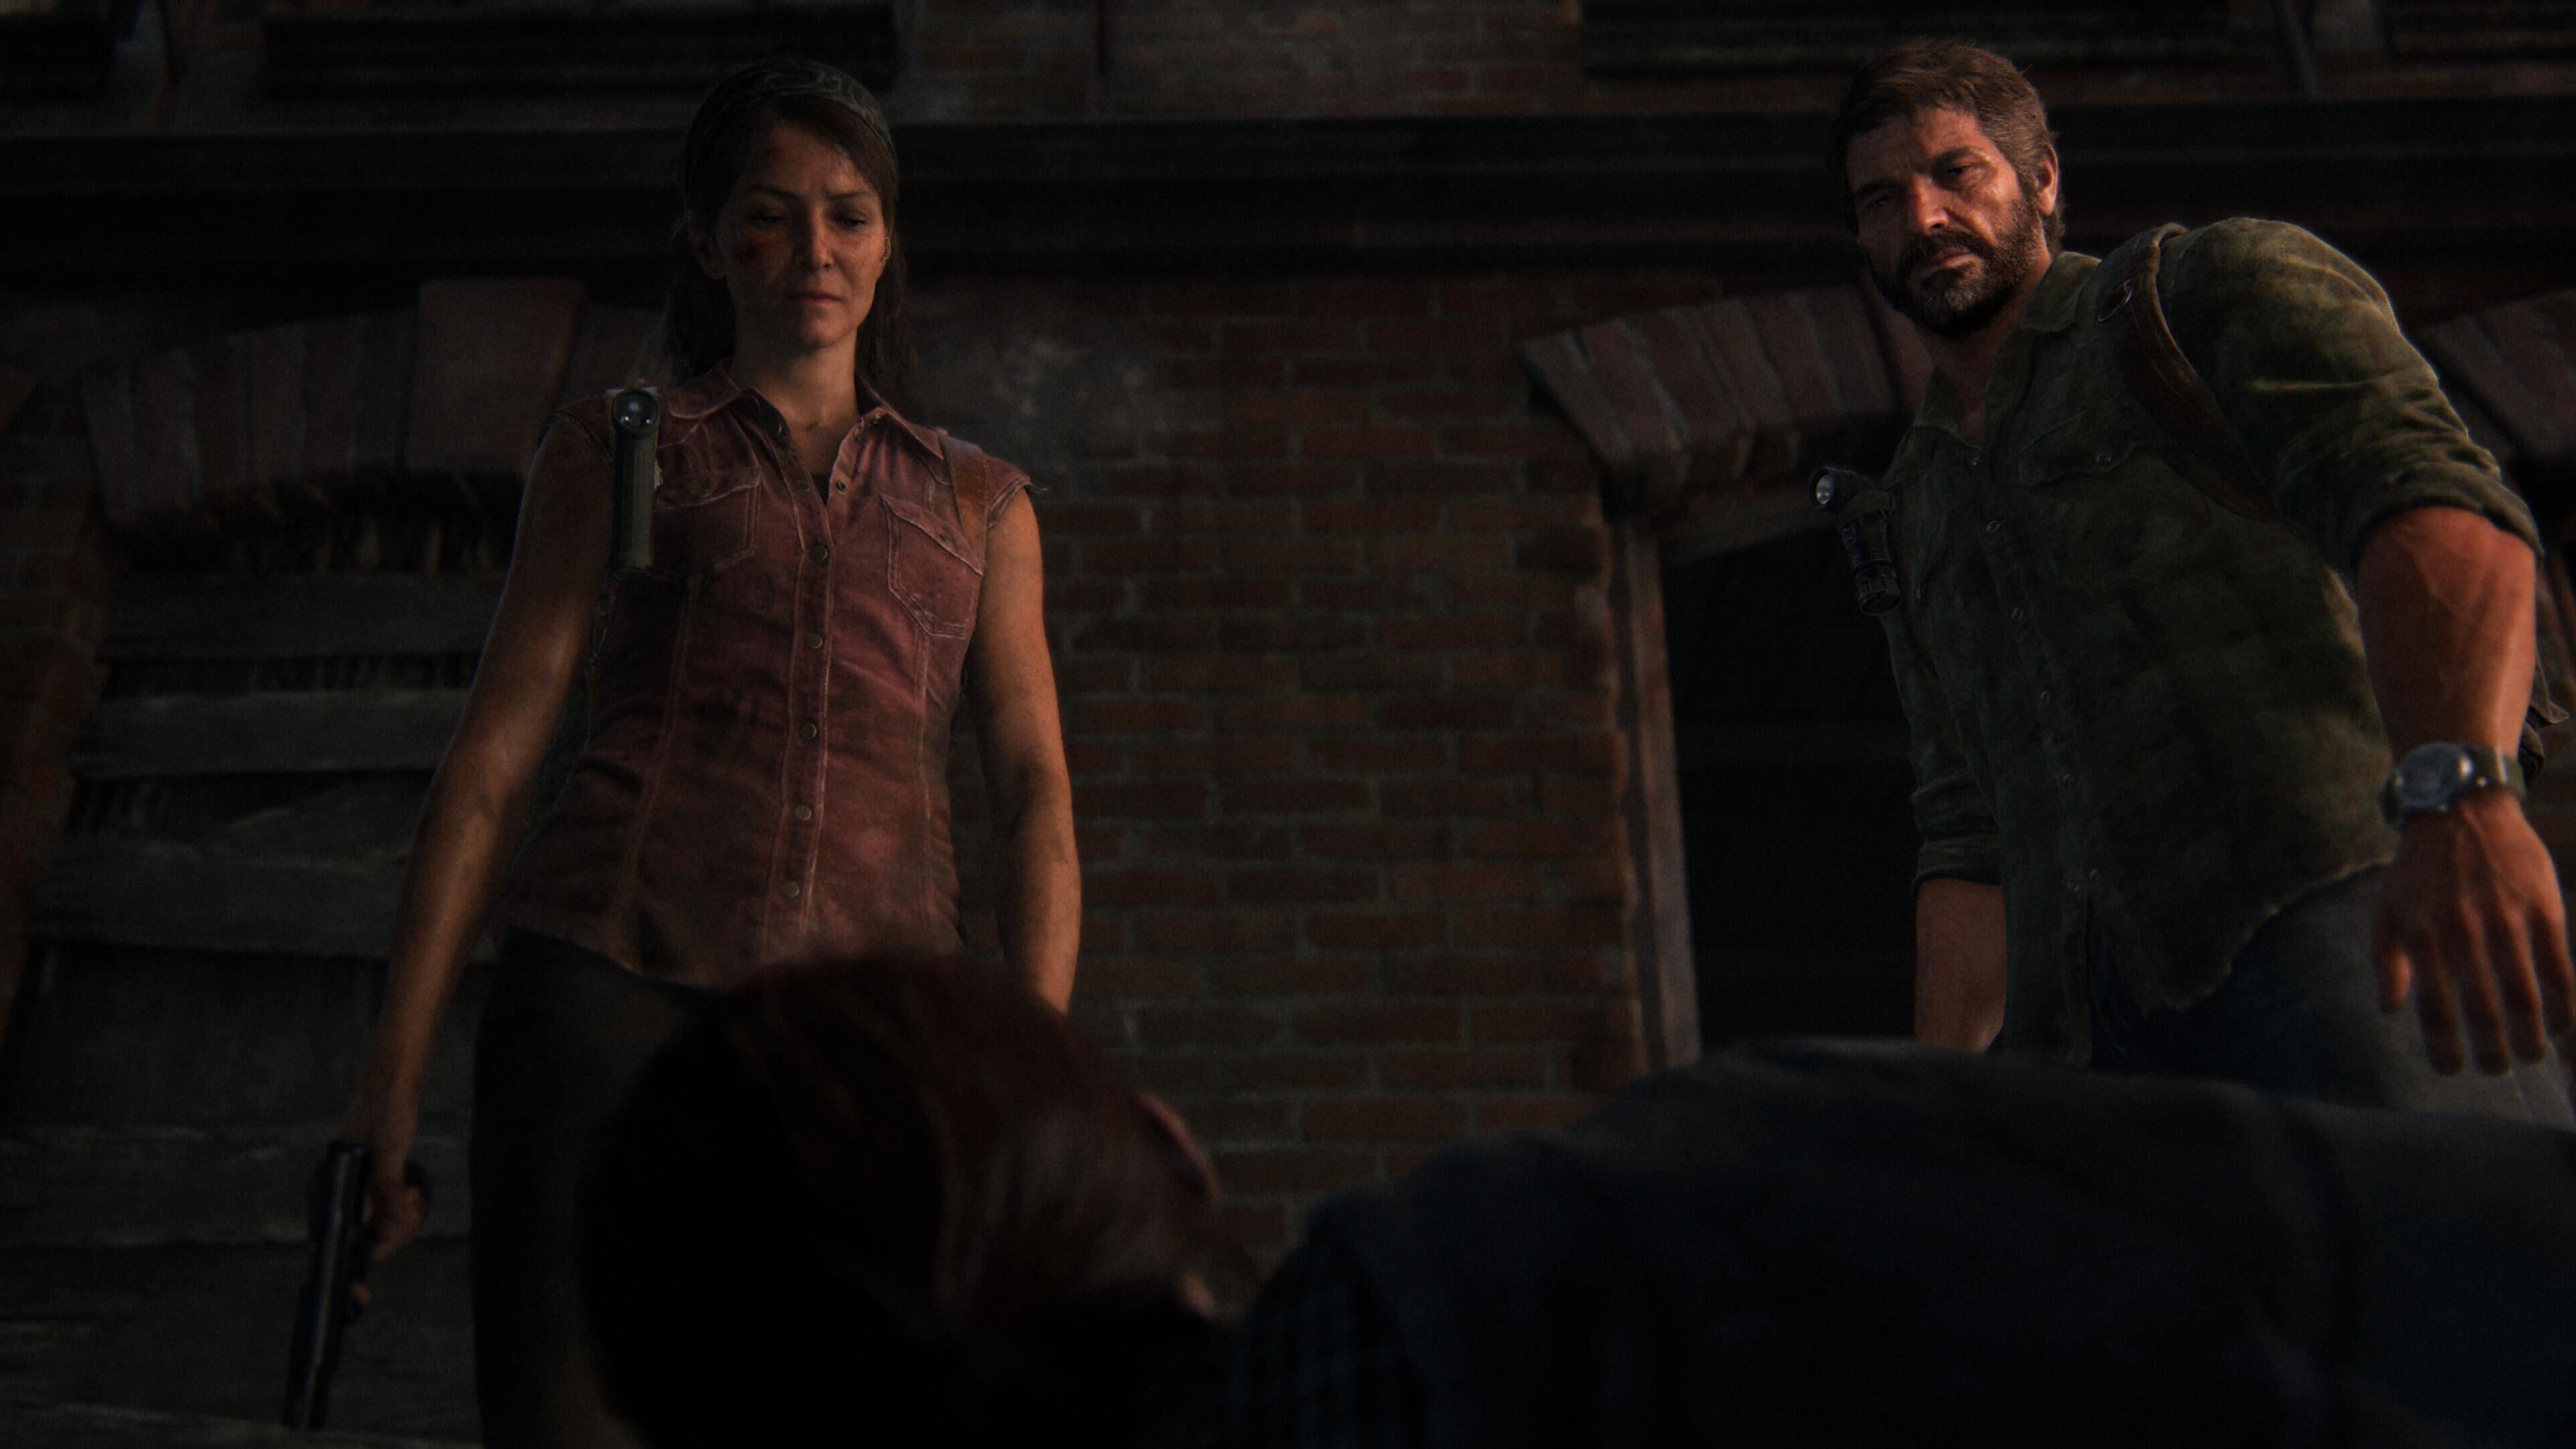 Tess kills Robert in the game, but in the show, he's more scared of Joel than anything else. (Screenshot: Naughty Dog / Kotaku)